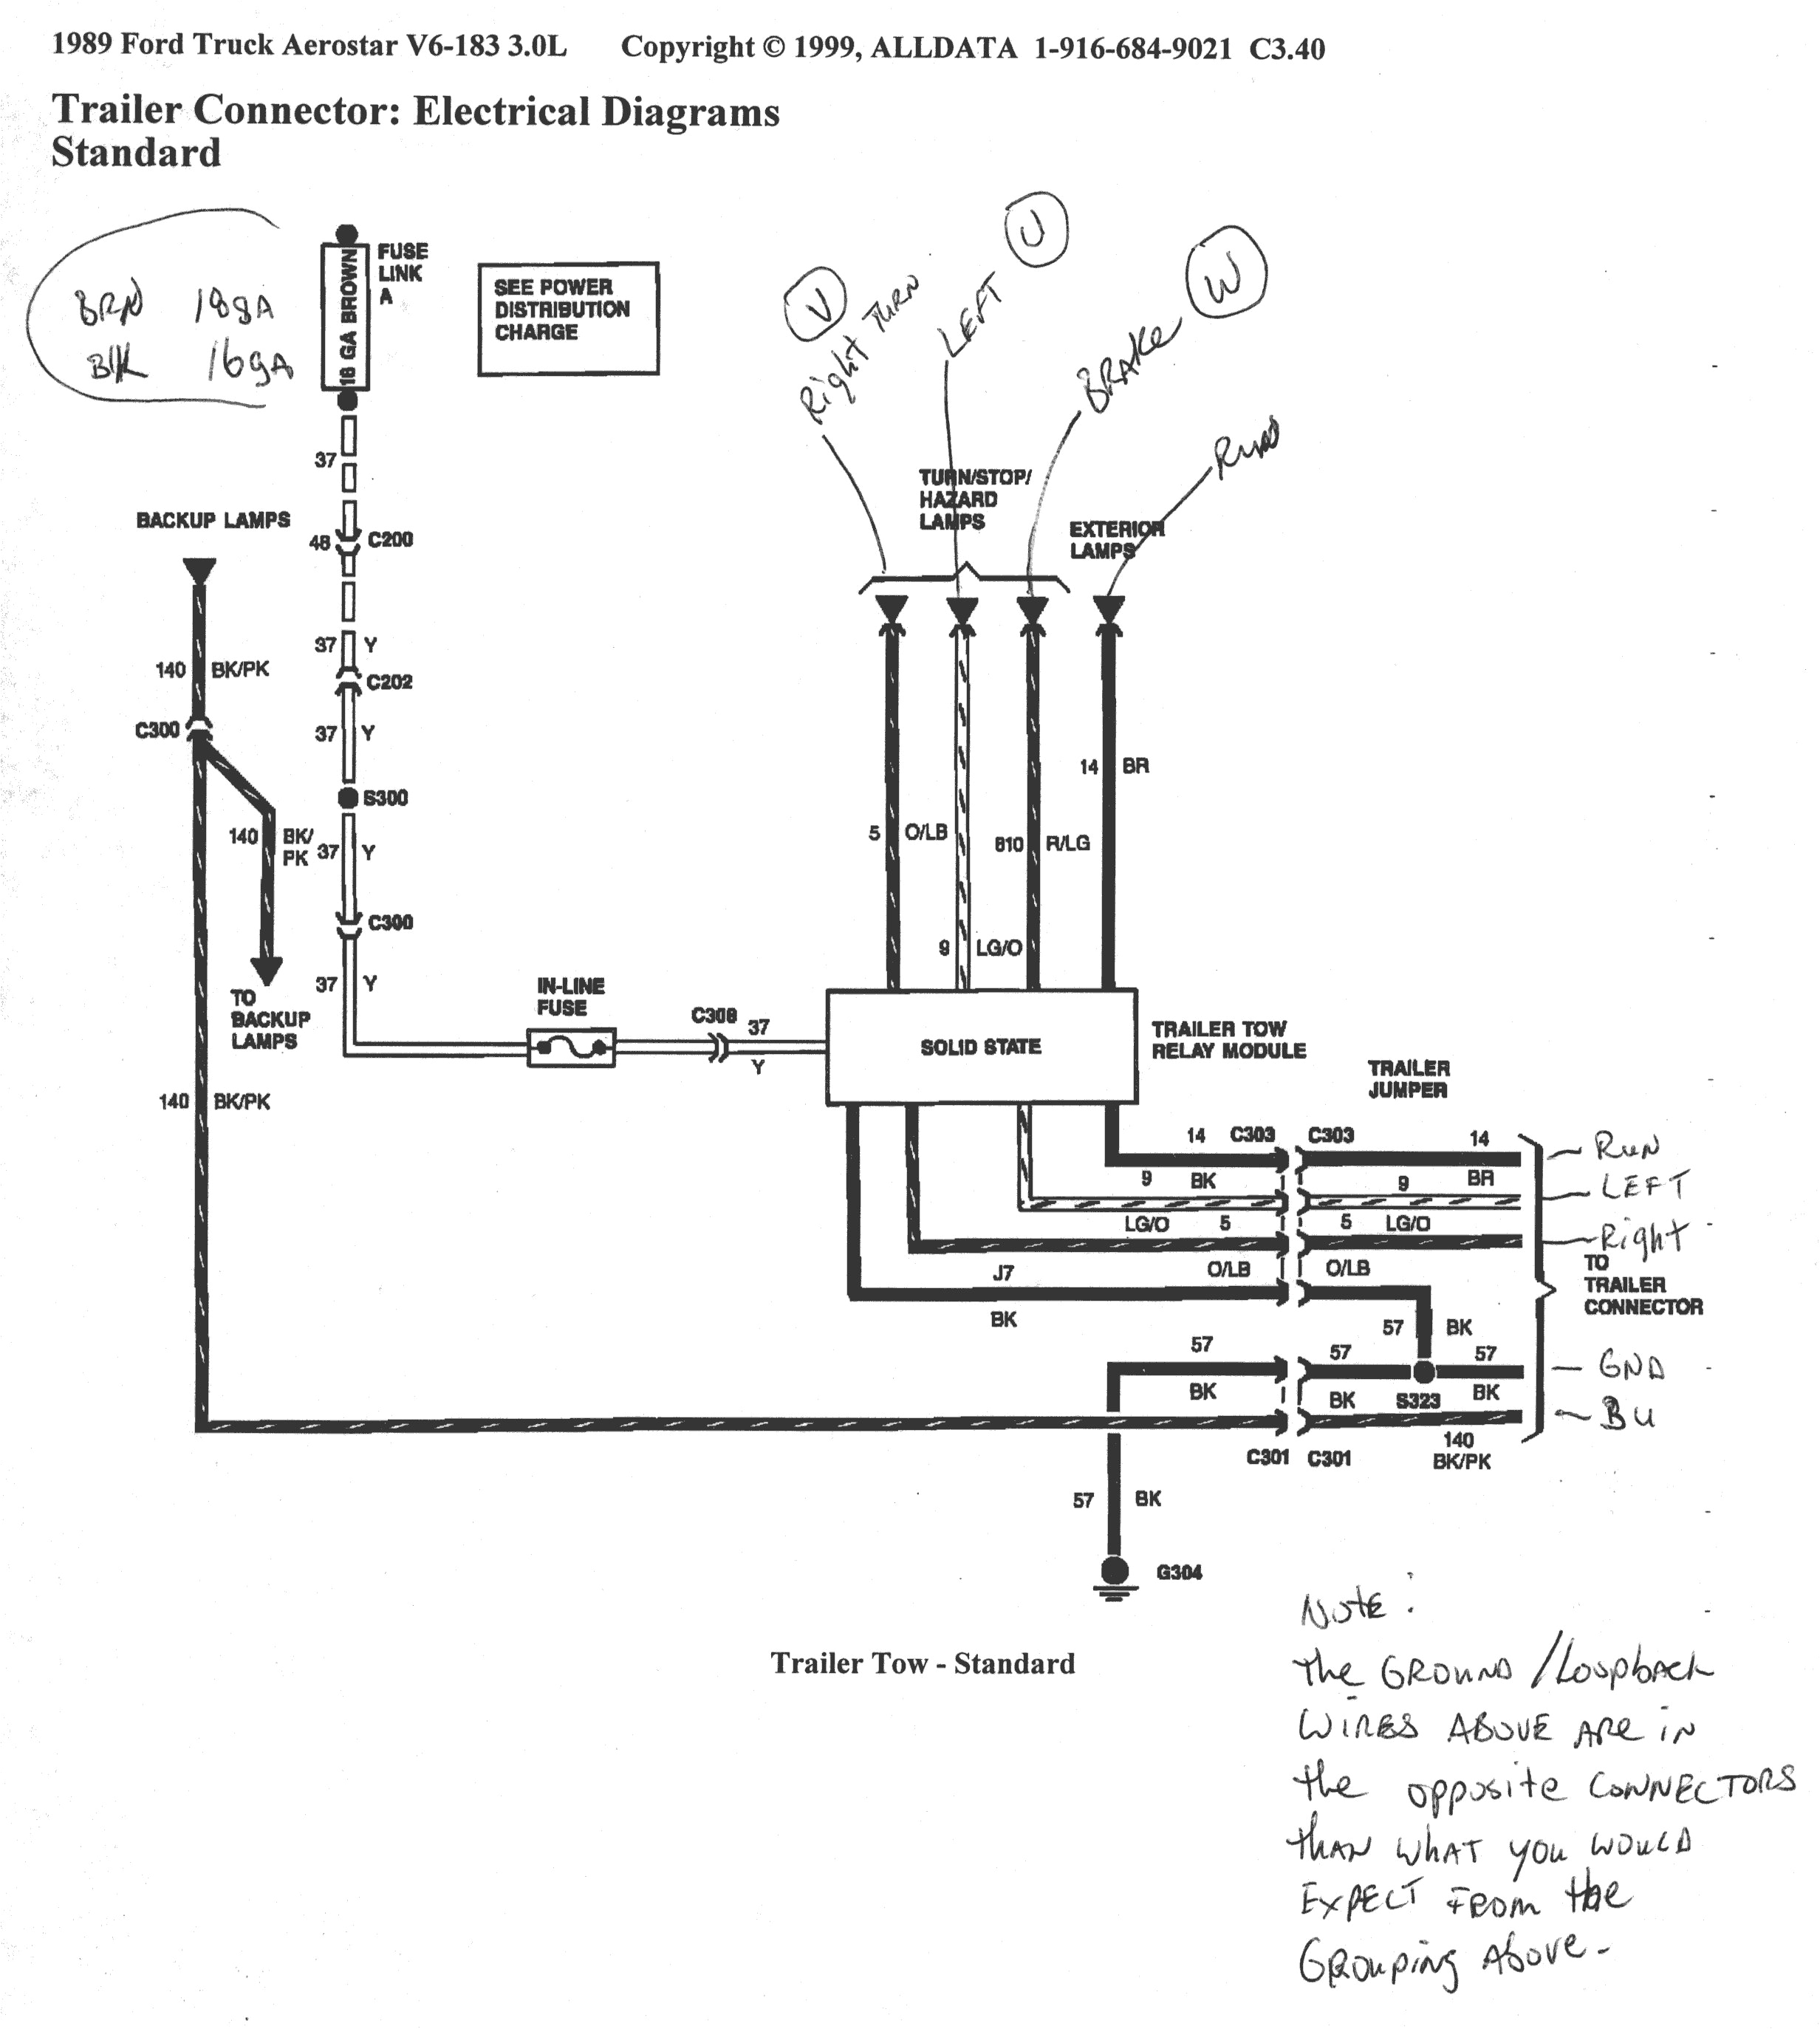 88 ford truck wire diagram wiring diagram review mix diagrams of 1988 f150 rear wiring wiring